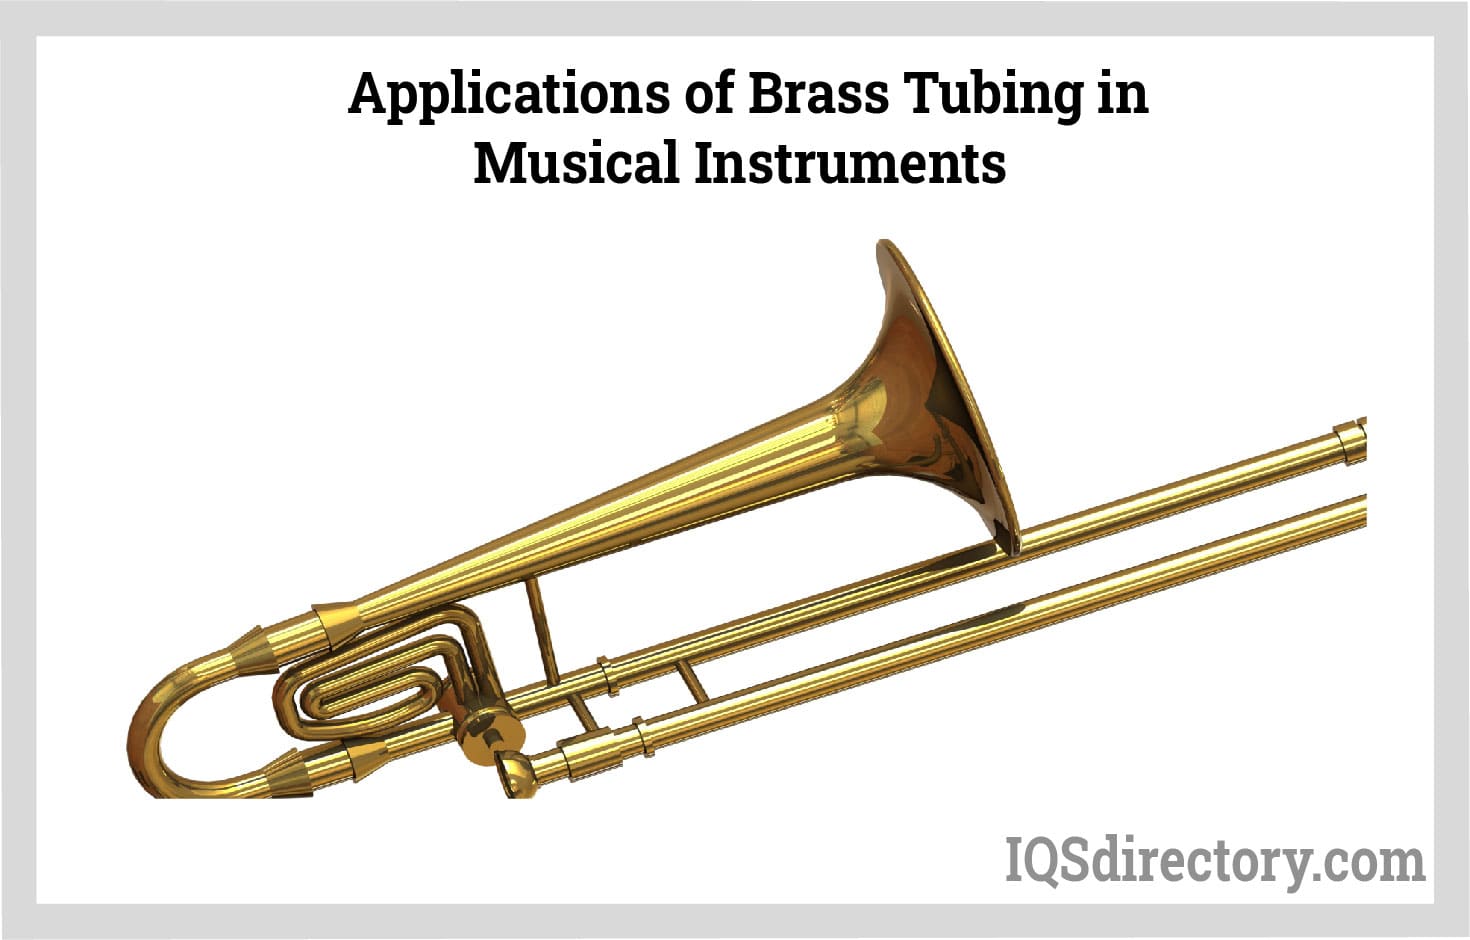 Applications of Brass Tubing in Musical Instruments